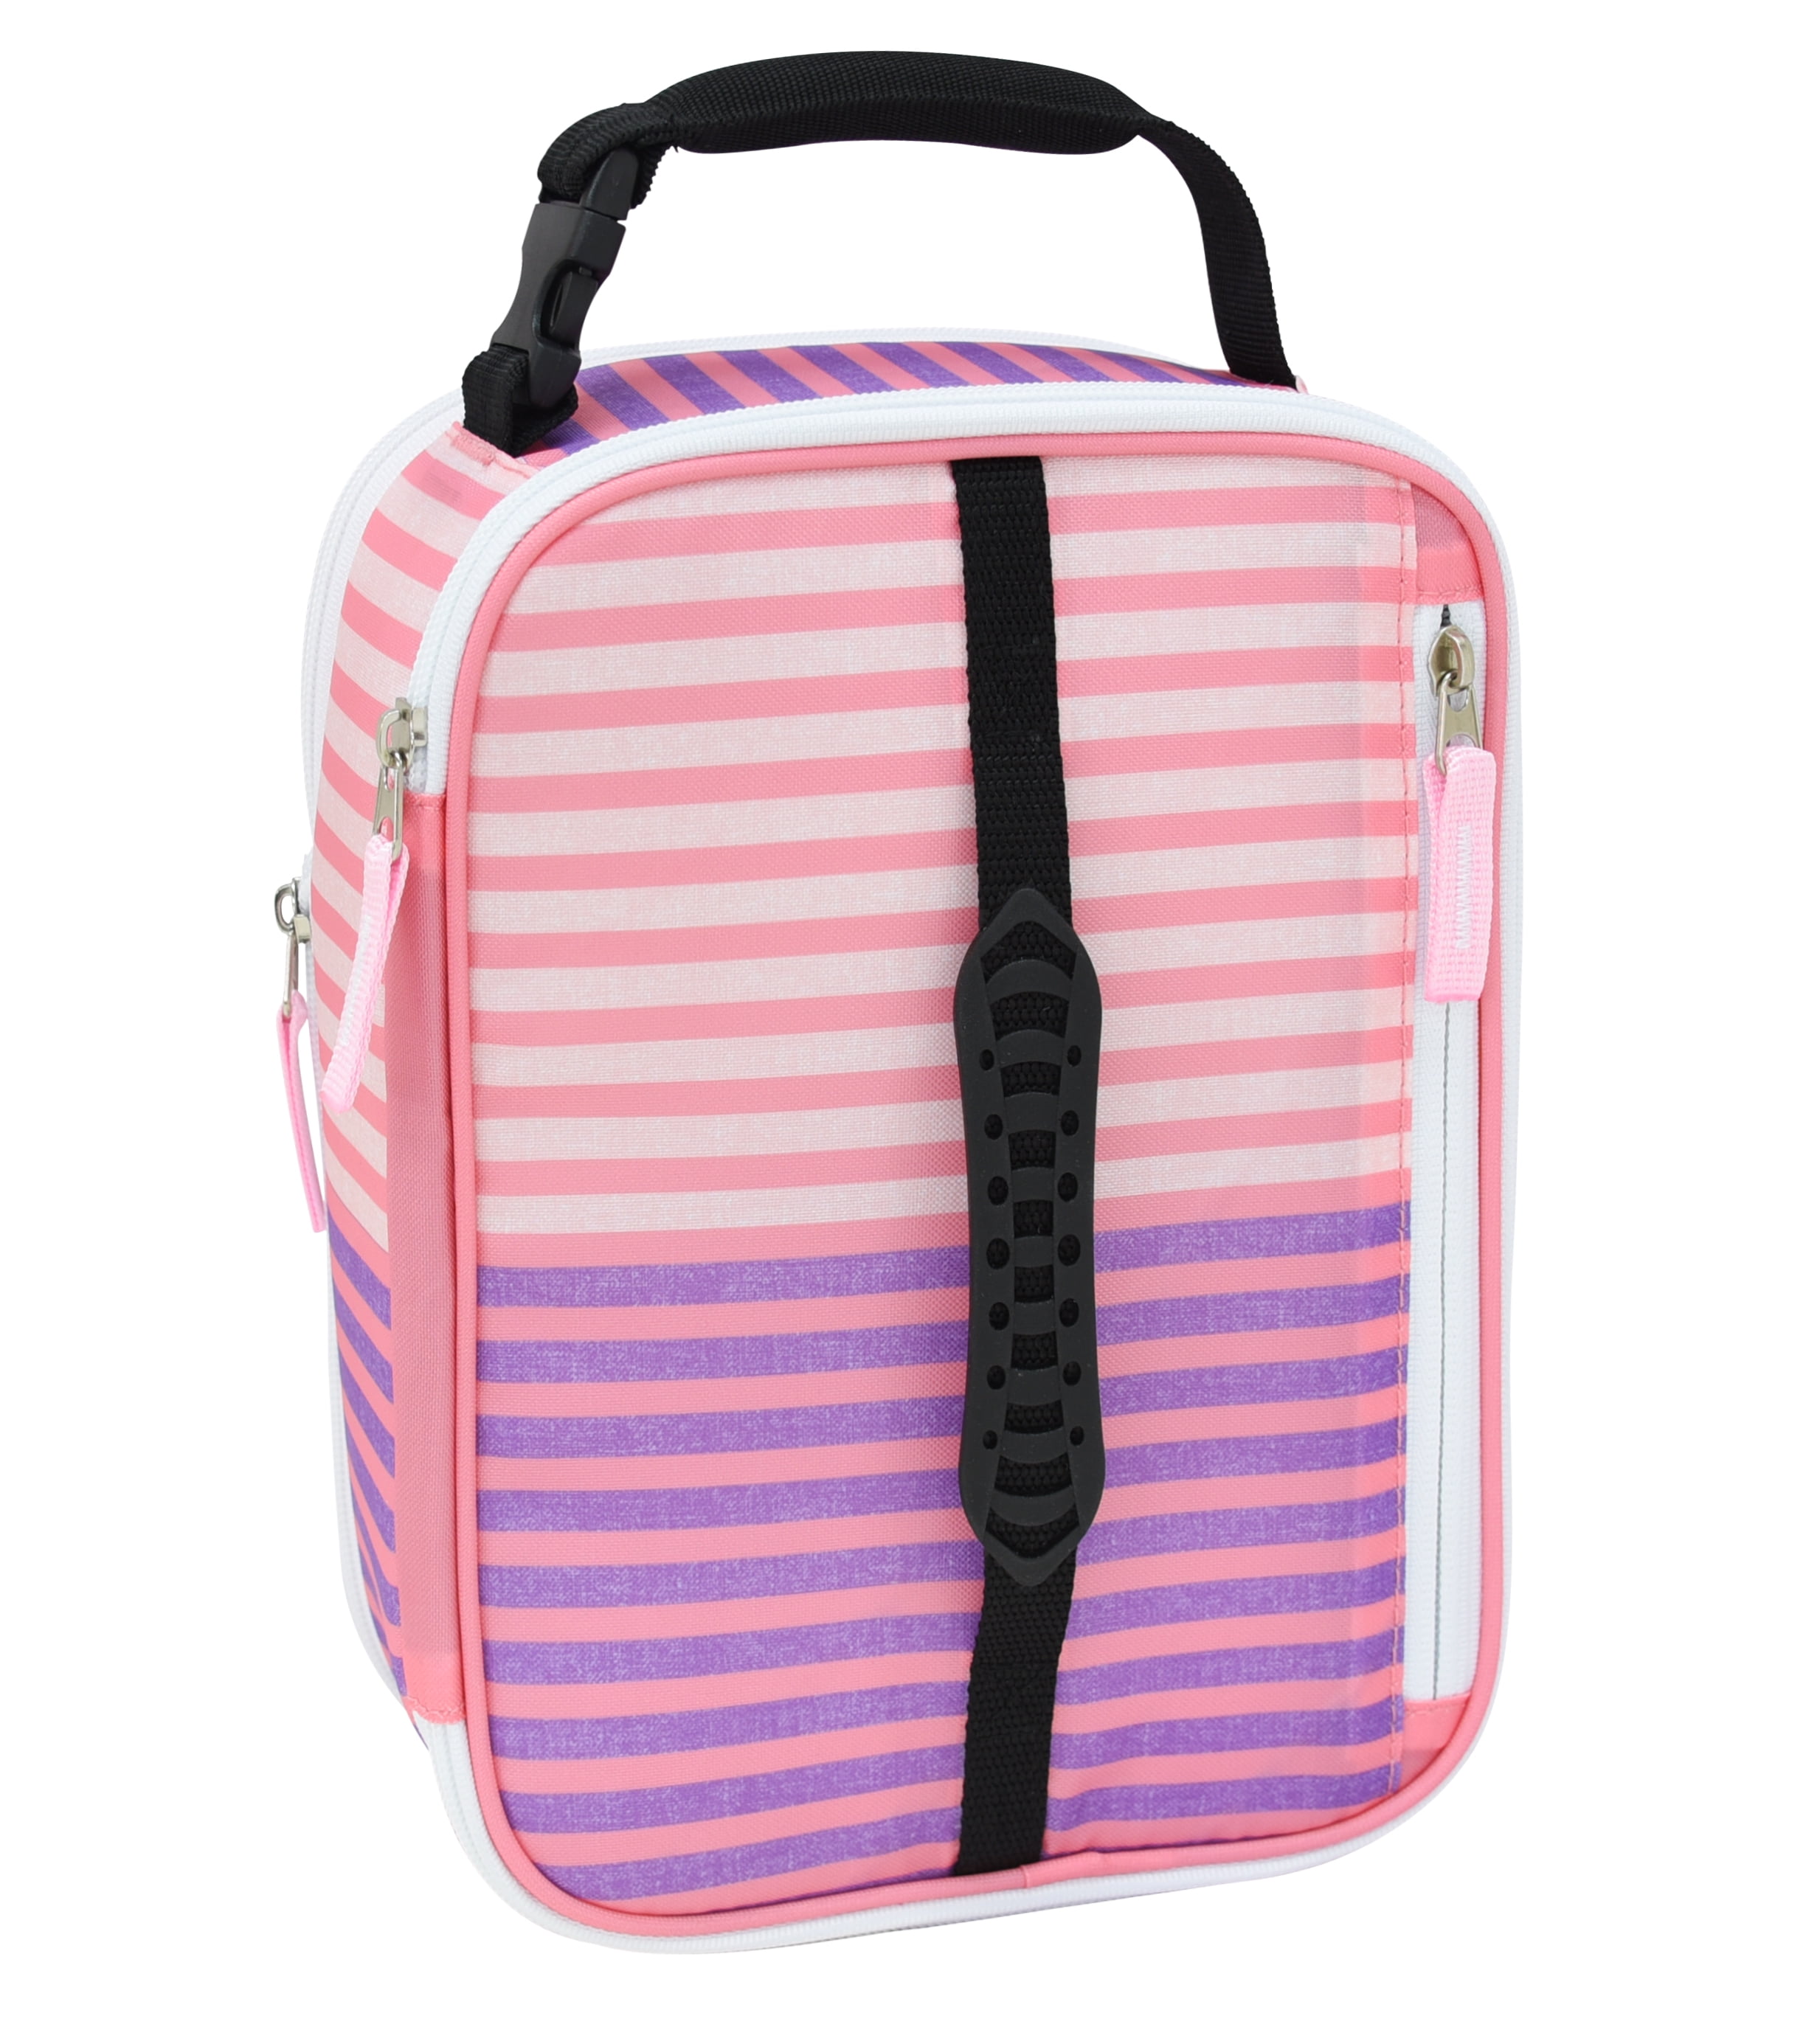 Your Zone Expandable/Insulated Lunch Bag with 2 pockets&2 soft handle